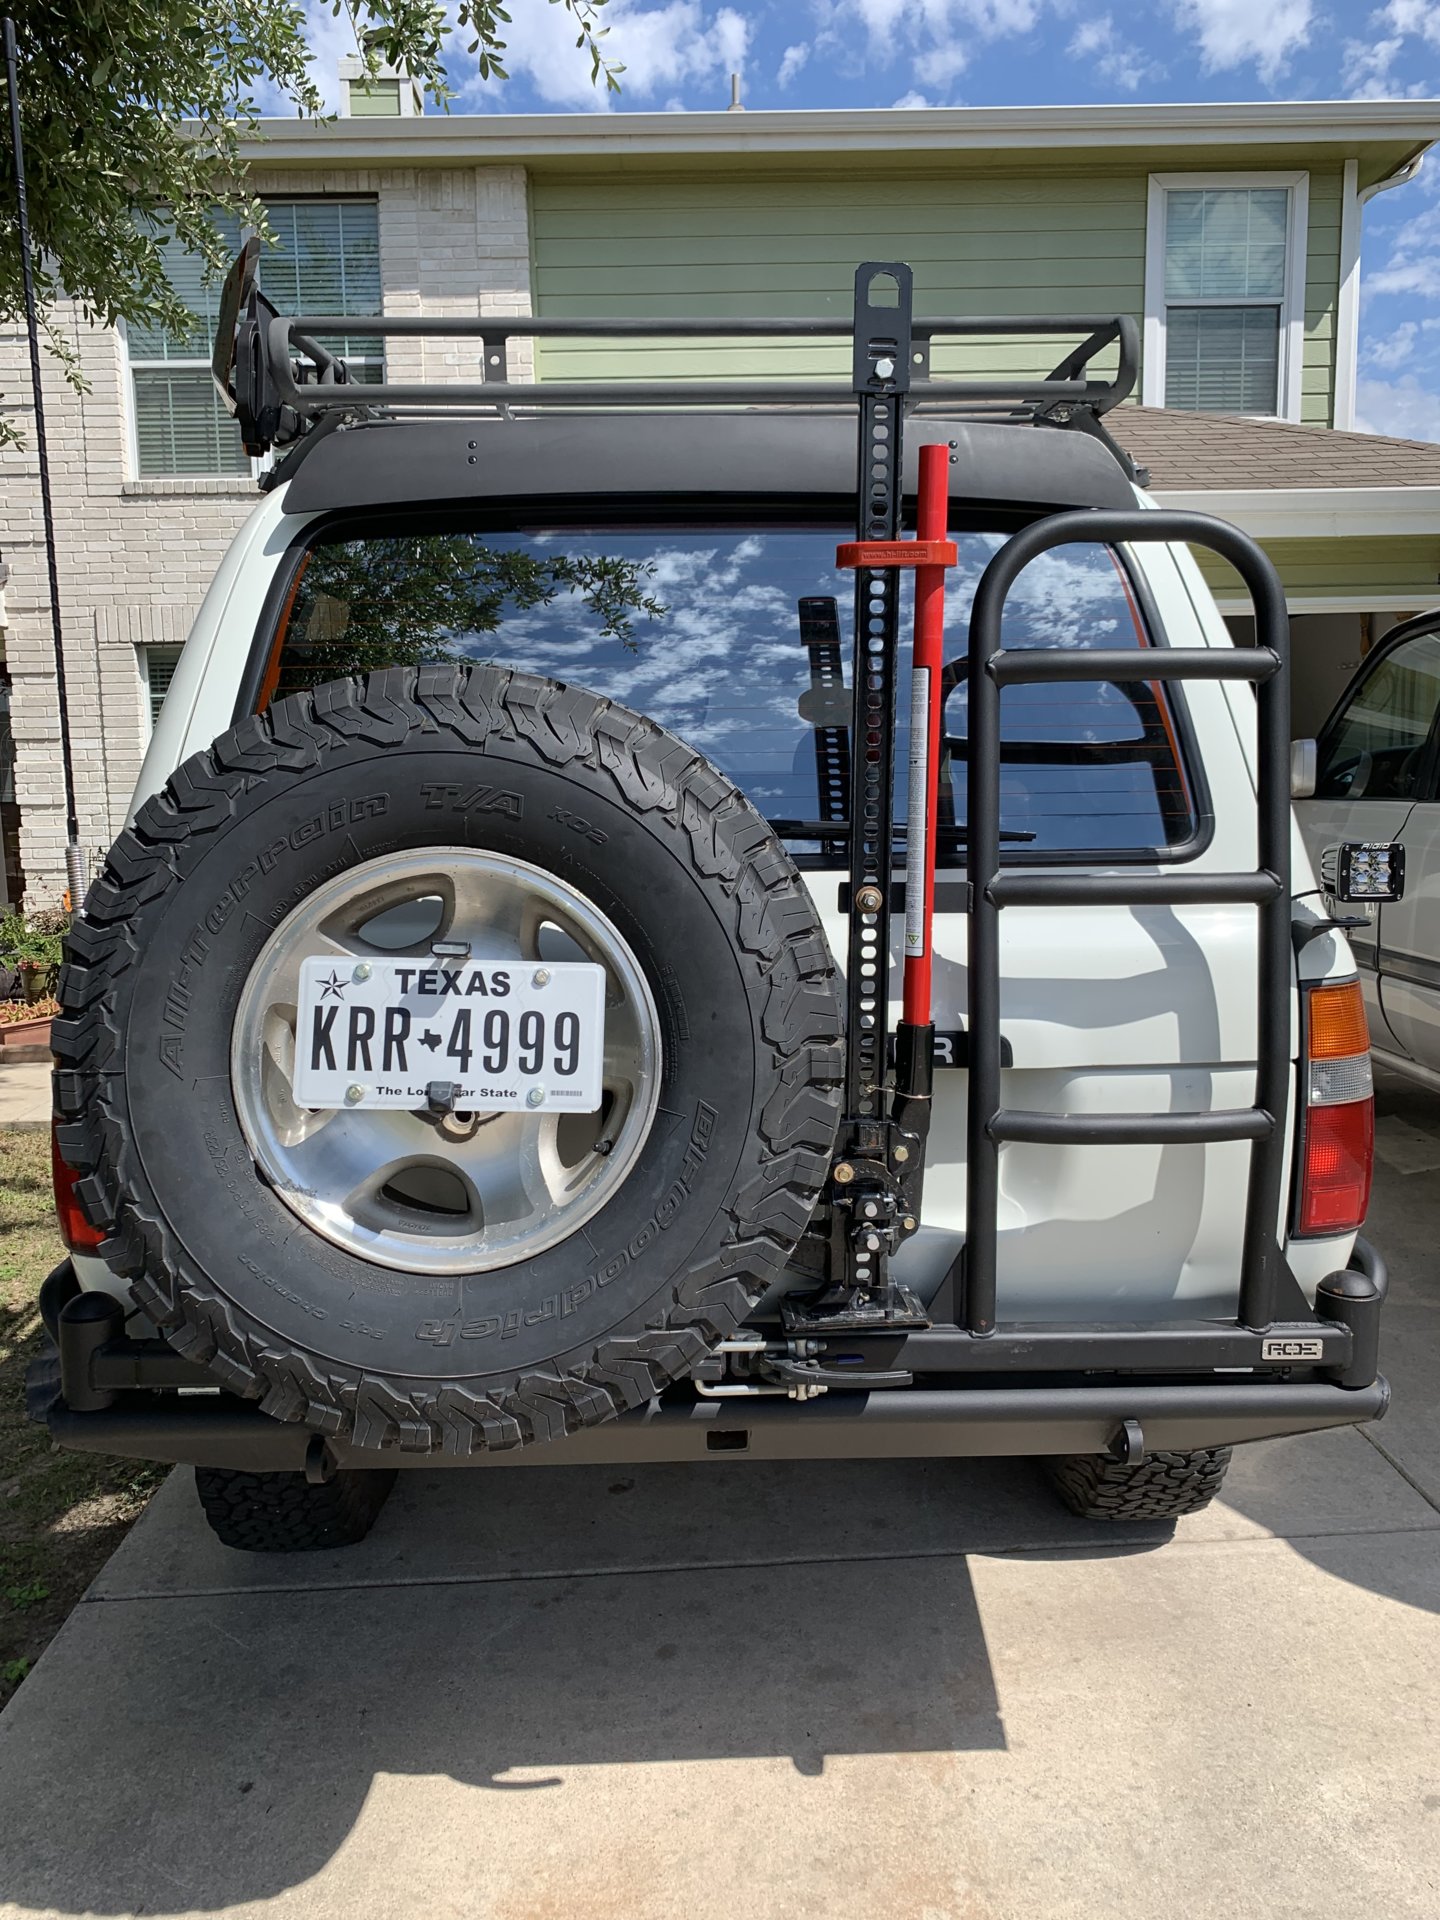 Show me you backup camera with rear bumber / tire carrier | IH8MUD Forum Bike Rack For Jeep Wrangler With Backup Camera